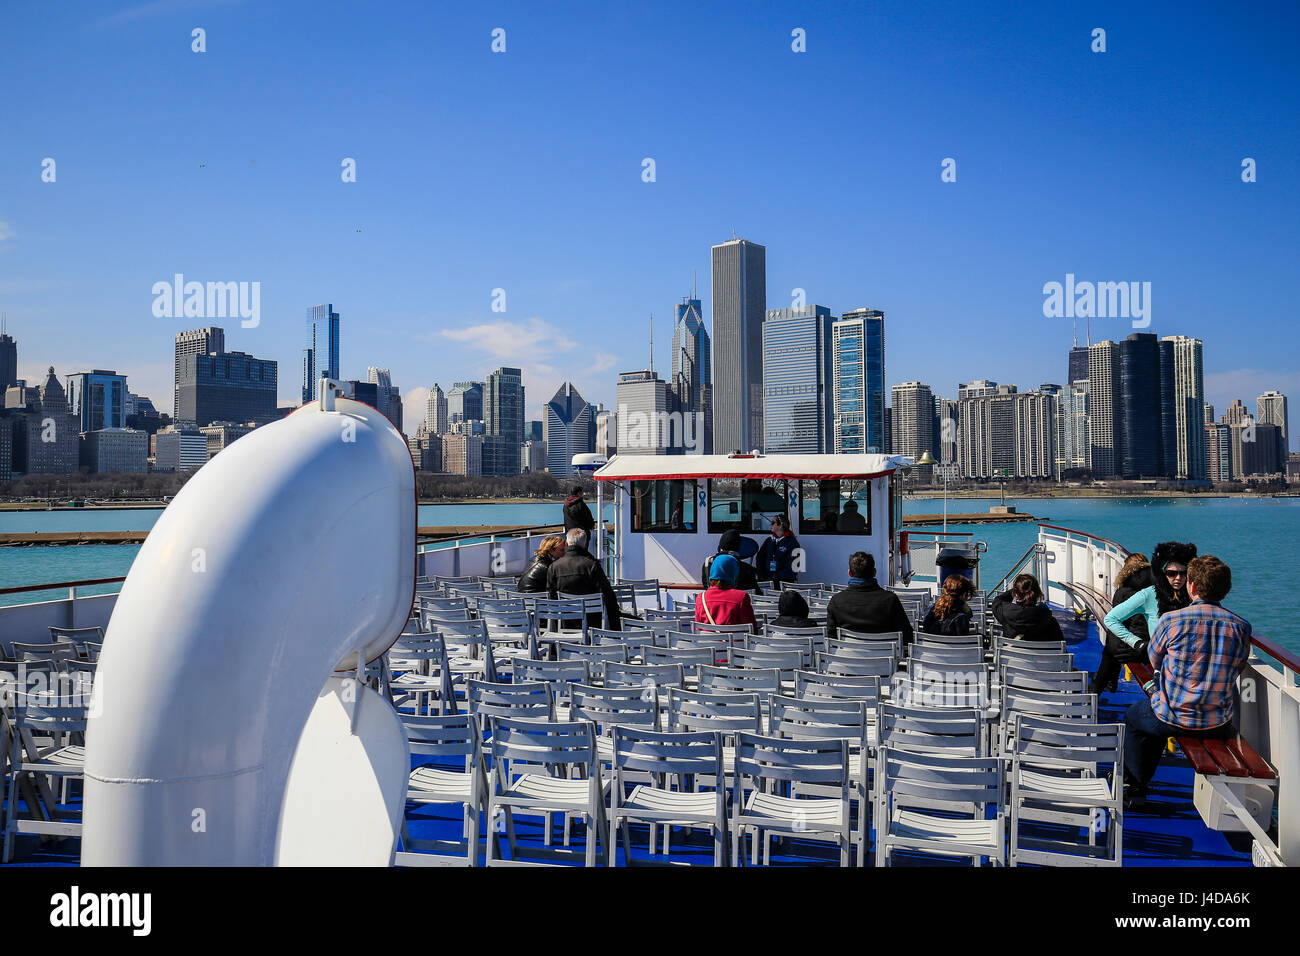 Boat tour on the MIchigansee, Chicago skyline, Chicago, Illinois, USA, North America, Bootstour auf dem MIchigansee, Chicago Skyline, Chicago, Illinoi Stock Photo